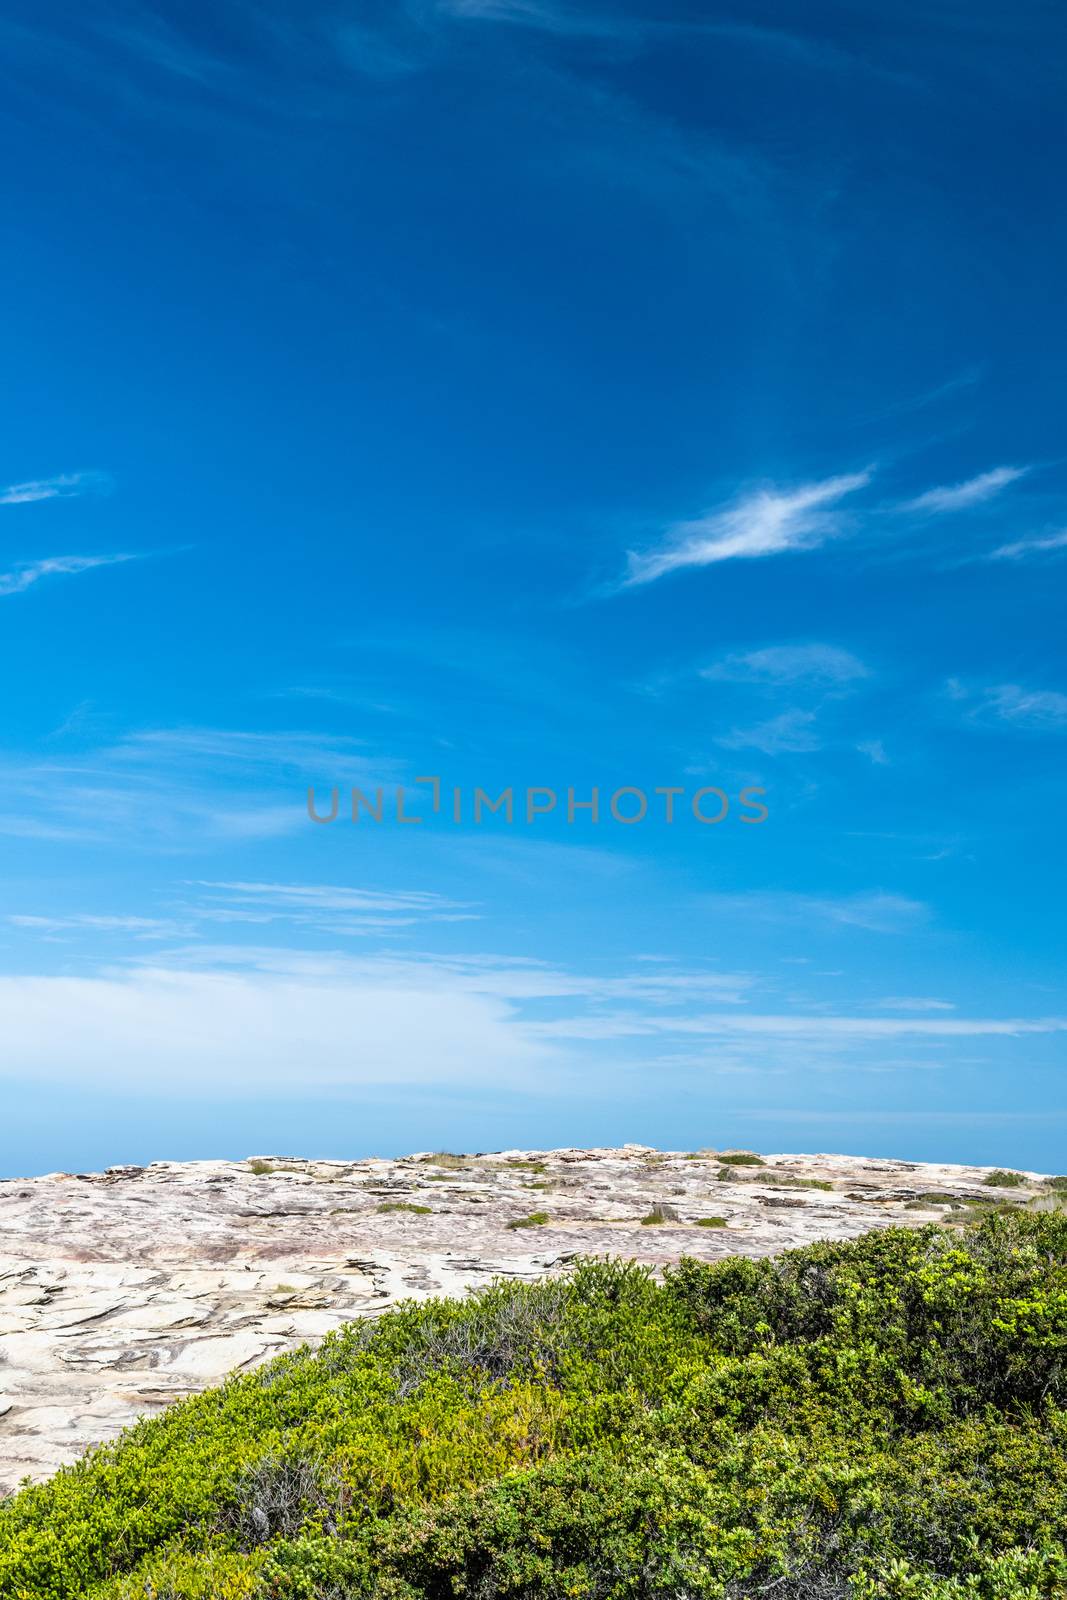 Detail of rocky Australian coastline with green vegetation, blue sky and clouds